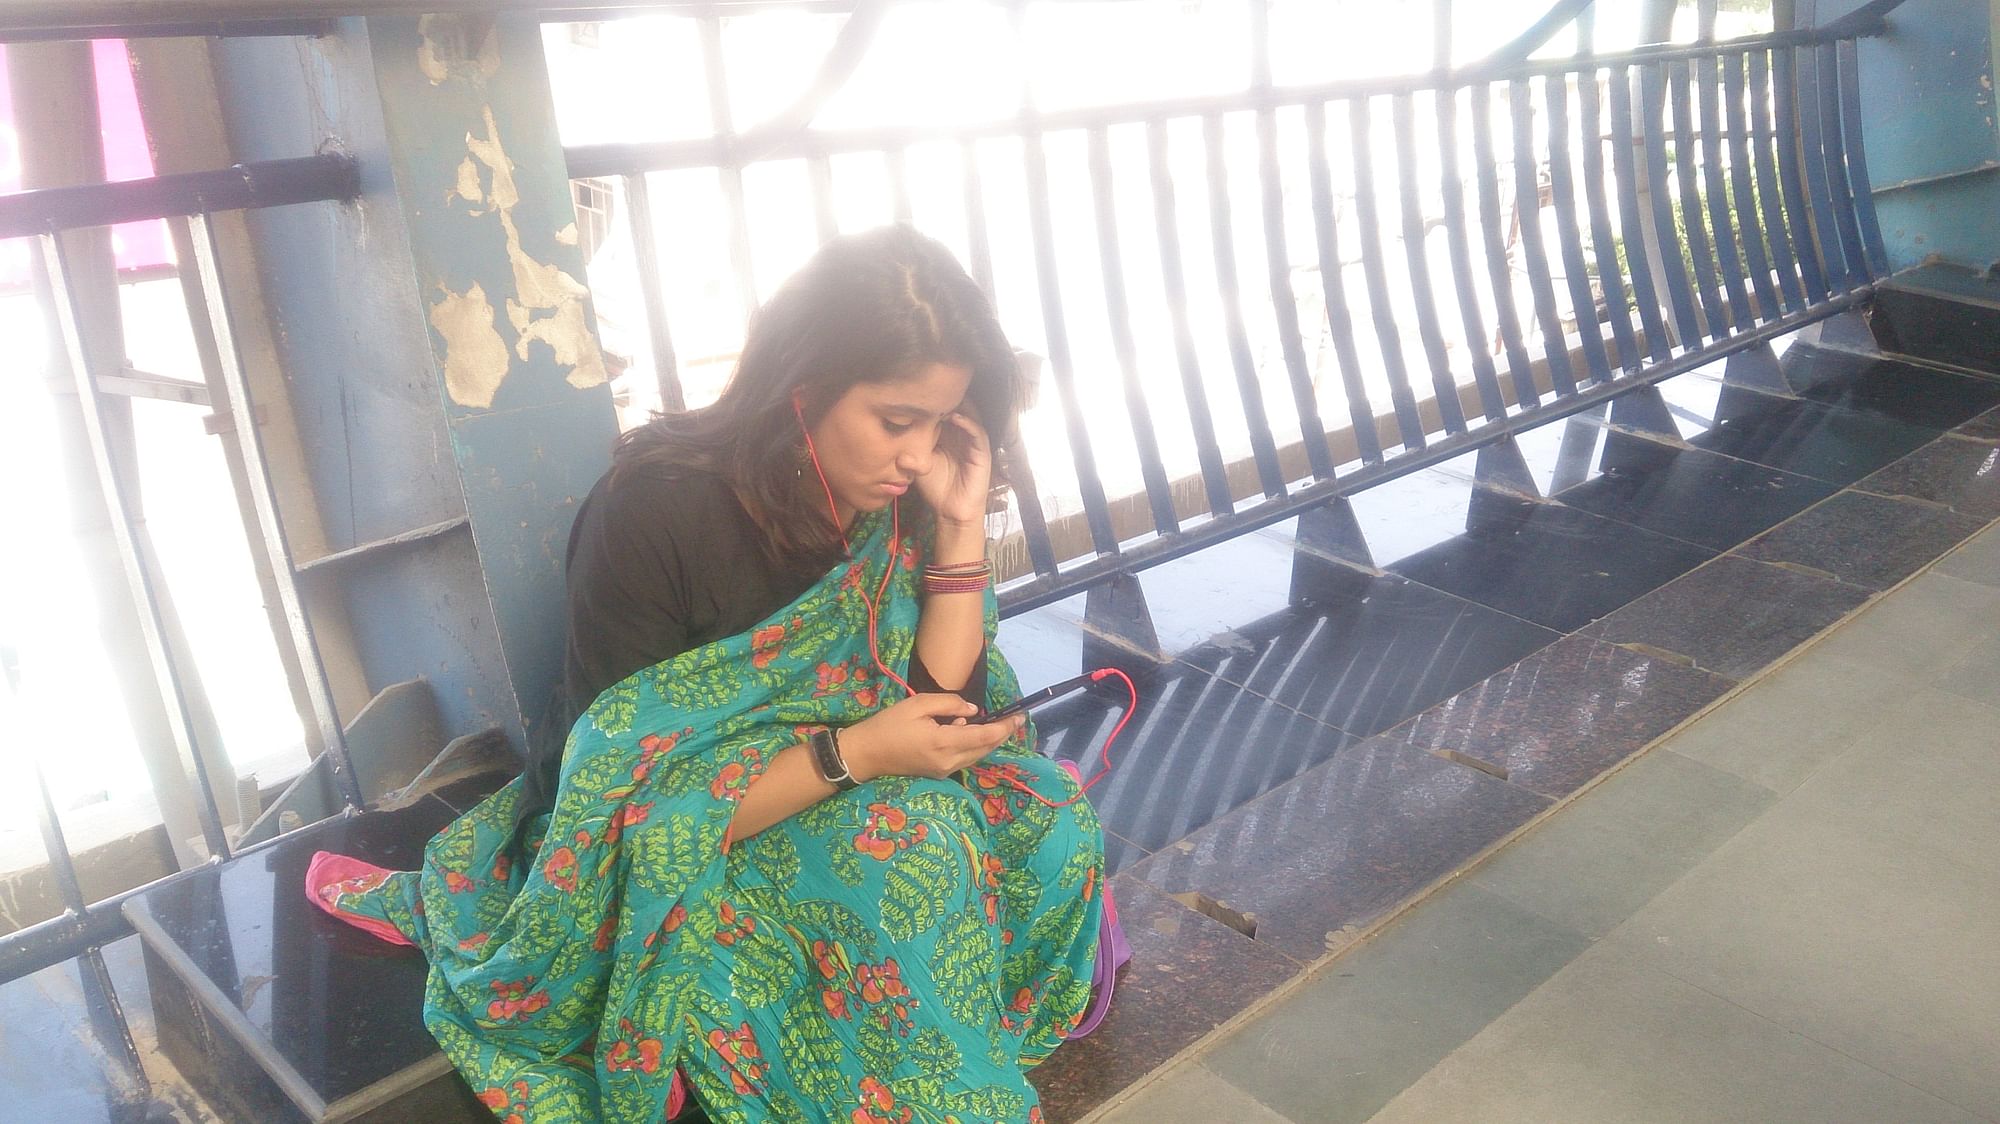 A passenger in the Delhi metro with earphones while waiting for her train. (Photo: The Quint)